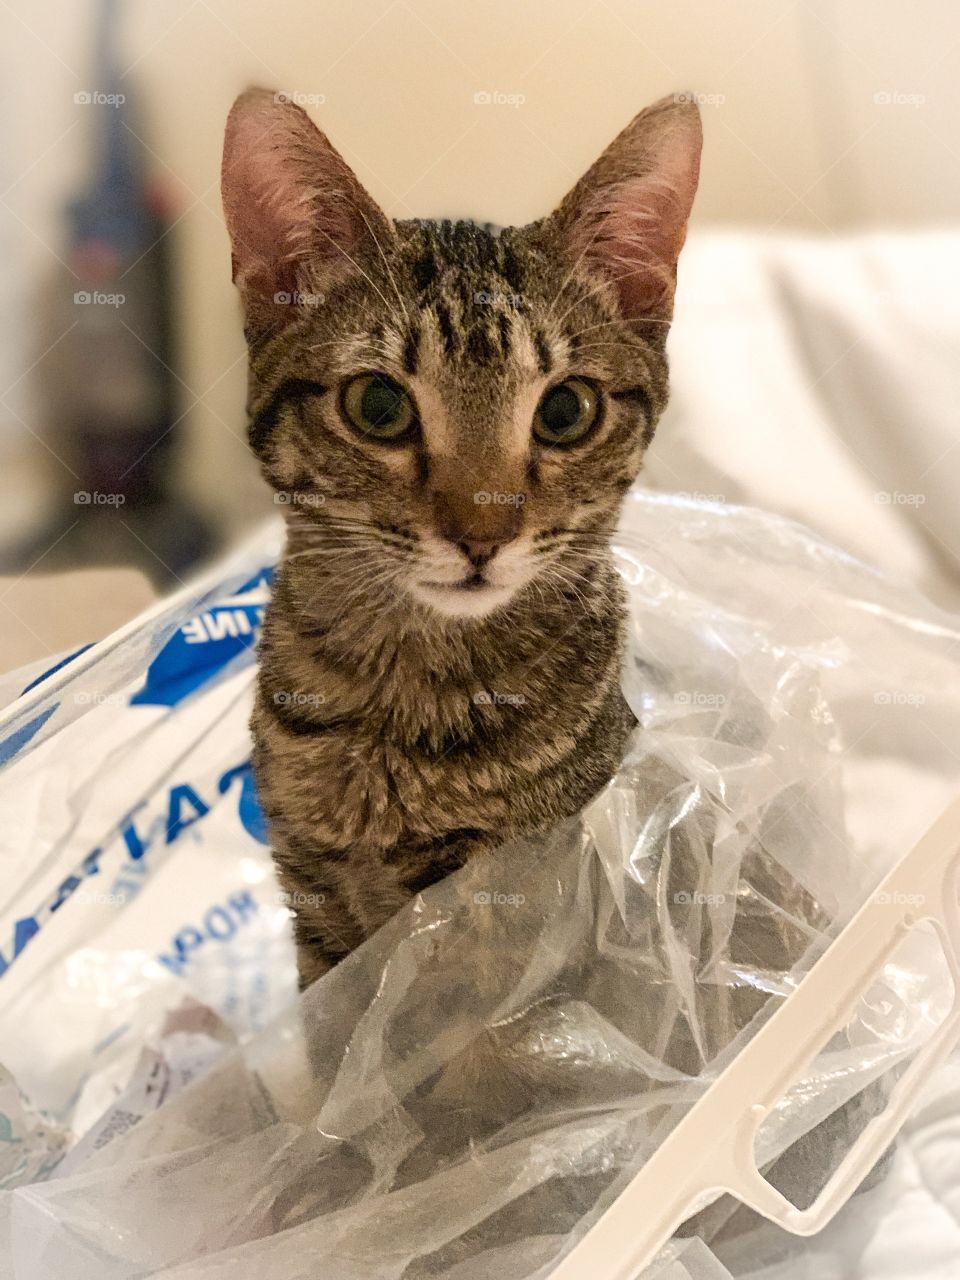 Oh did you need this bag?